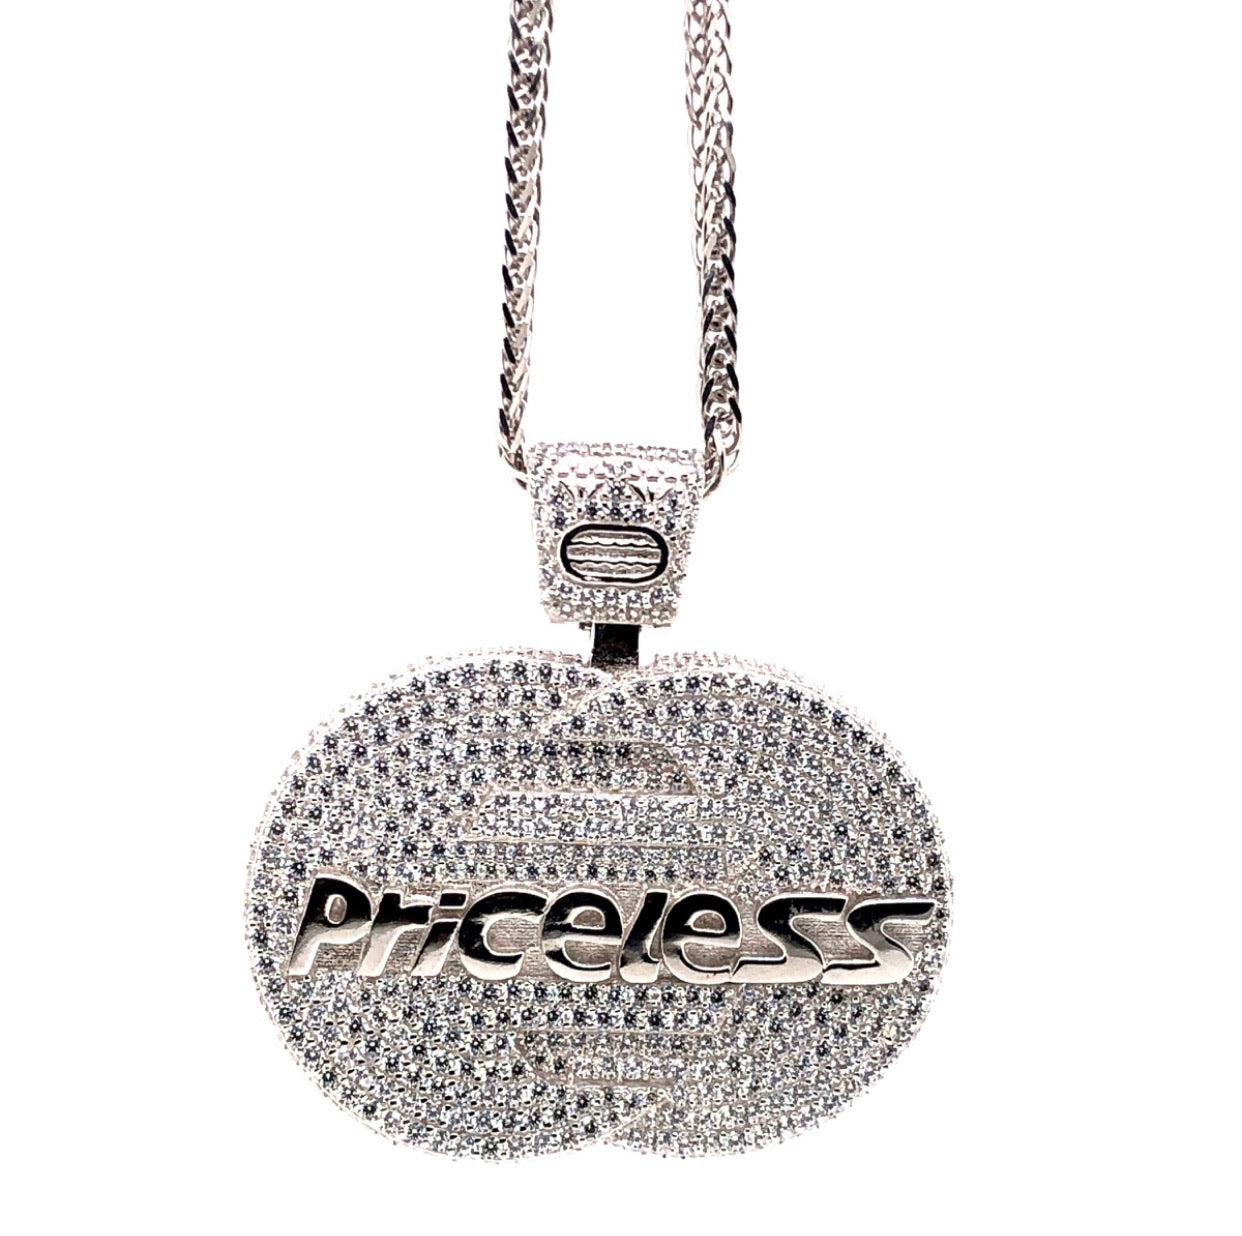 Iced Priceless Silver Pendant